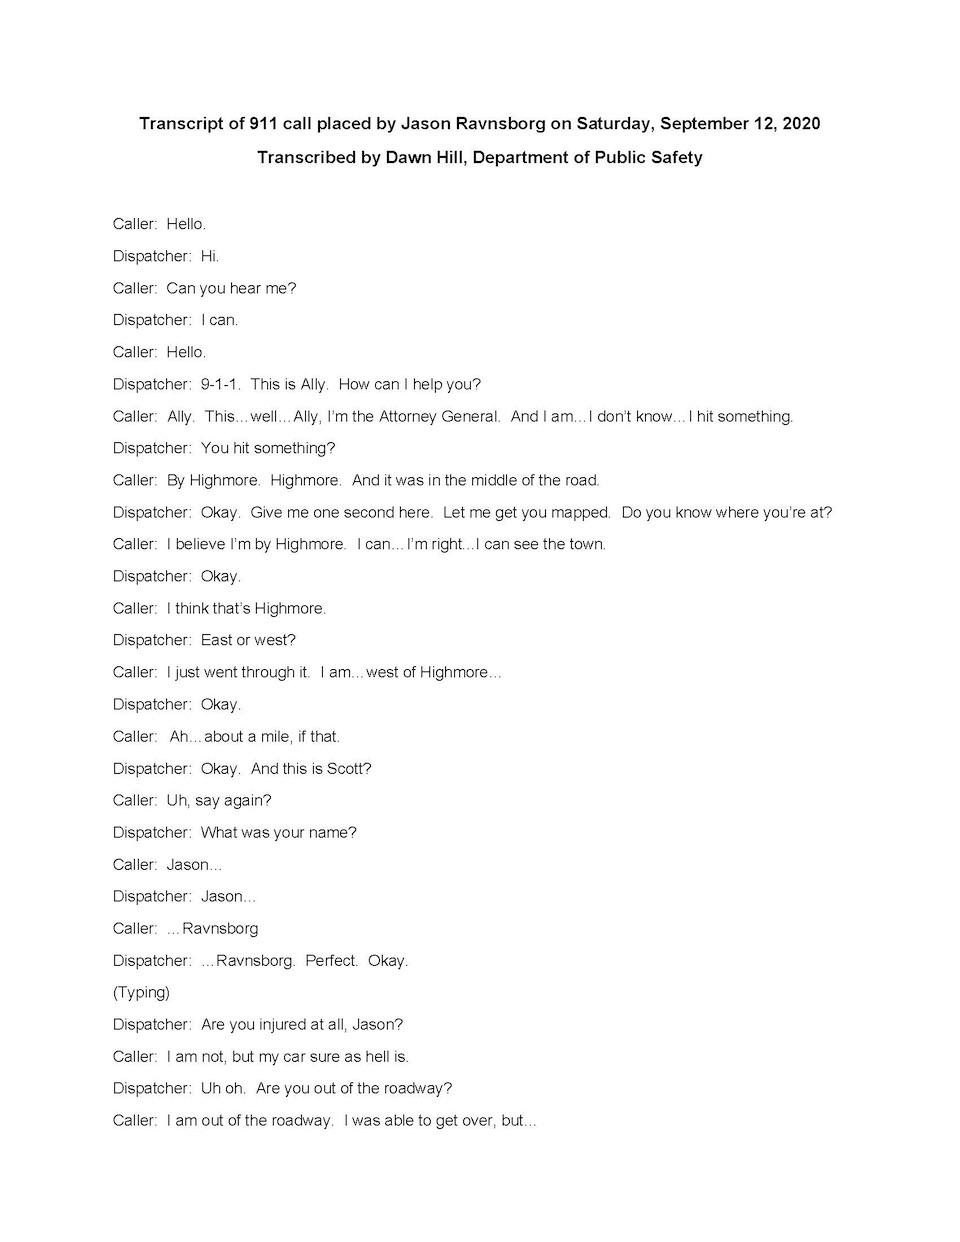 Transcript of 9-1-1- call placed by Jason Ravnsborg, 2020.09.12, transcribed by Dawn Hill, SD Dept. of Public Safety, posted to KNBN, 2020.10.13, p. 1.